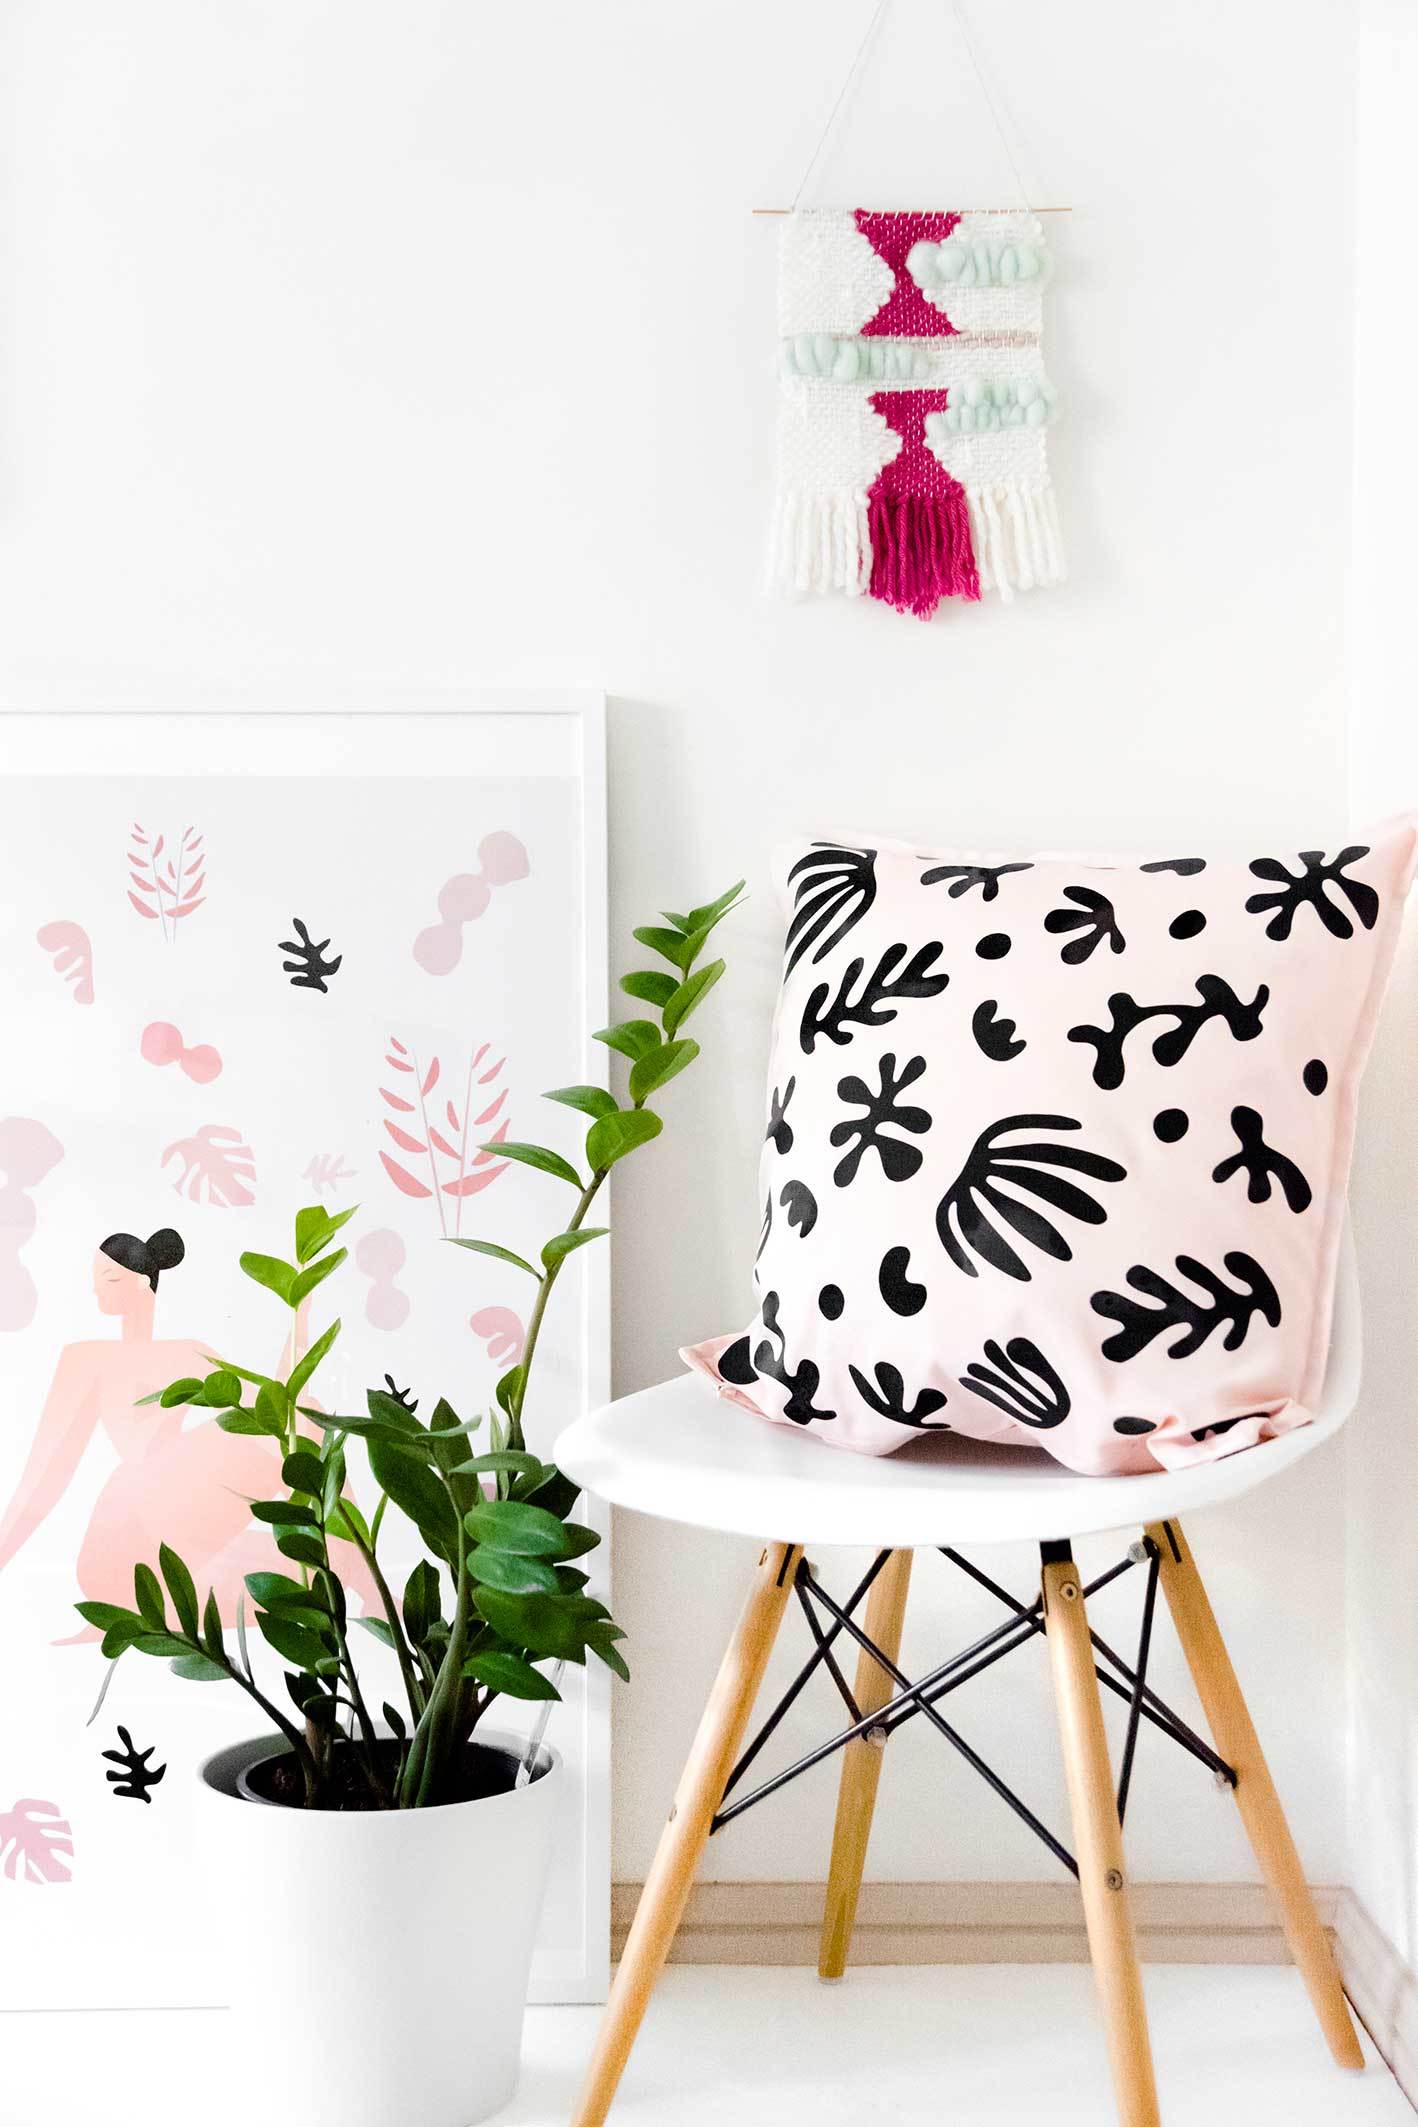 Dress up a plain pillow in an instant with heat-set vinyl (plus free printable!)